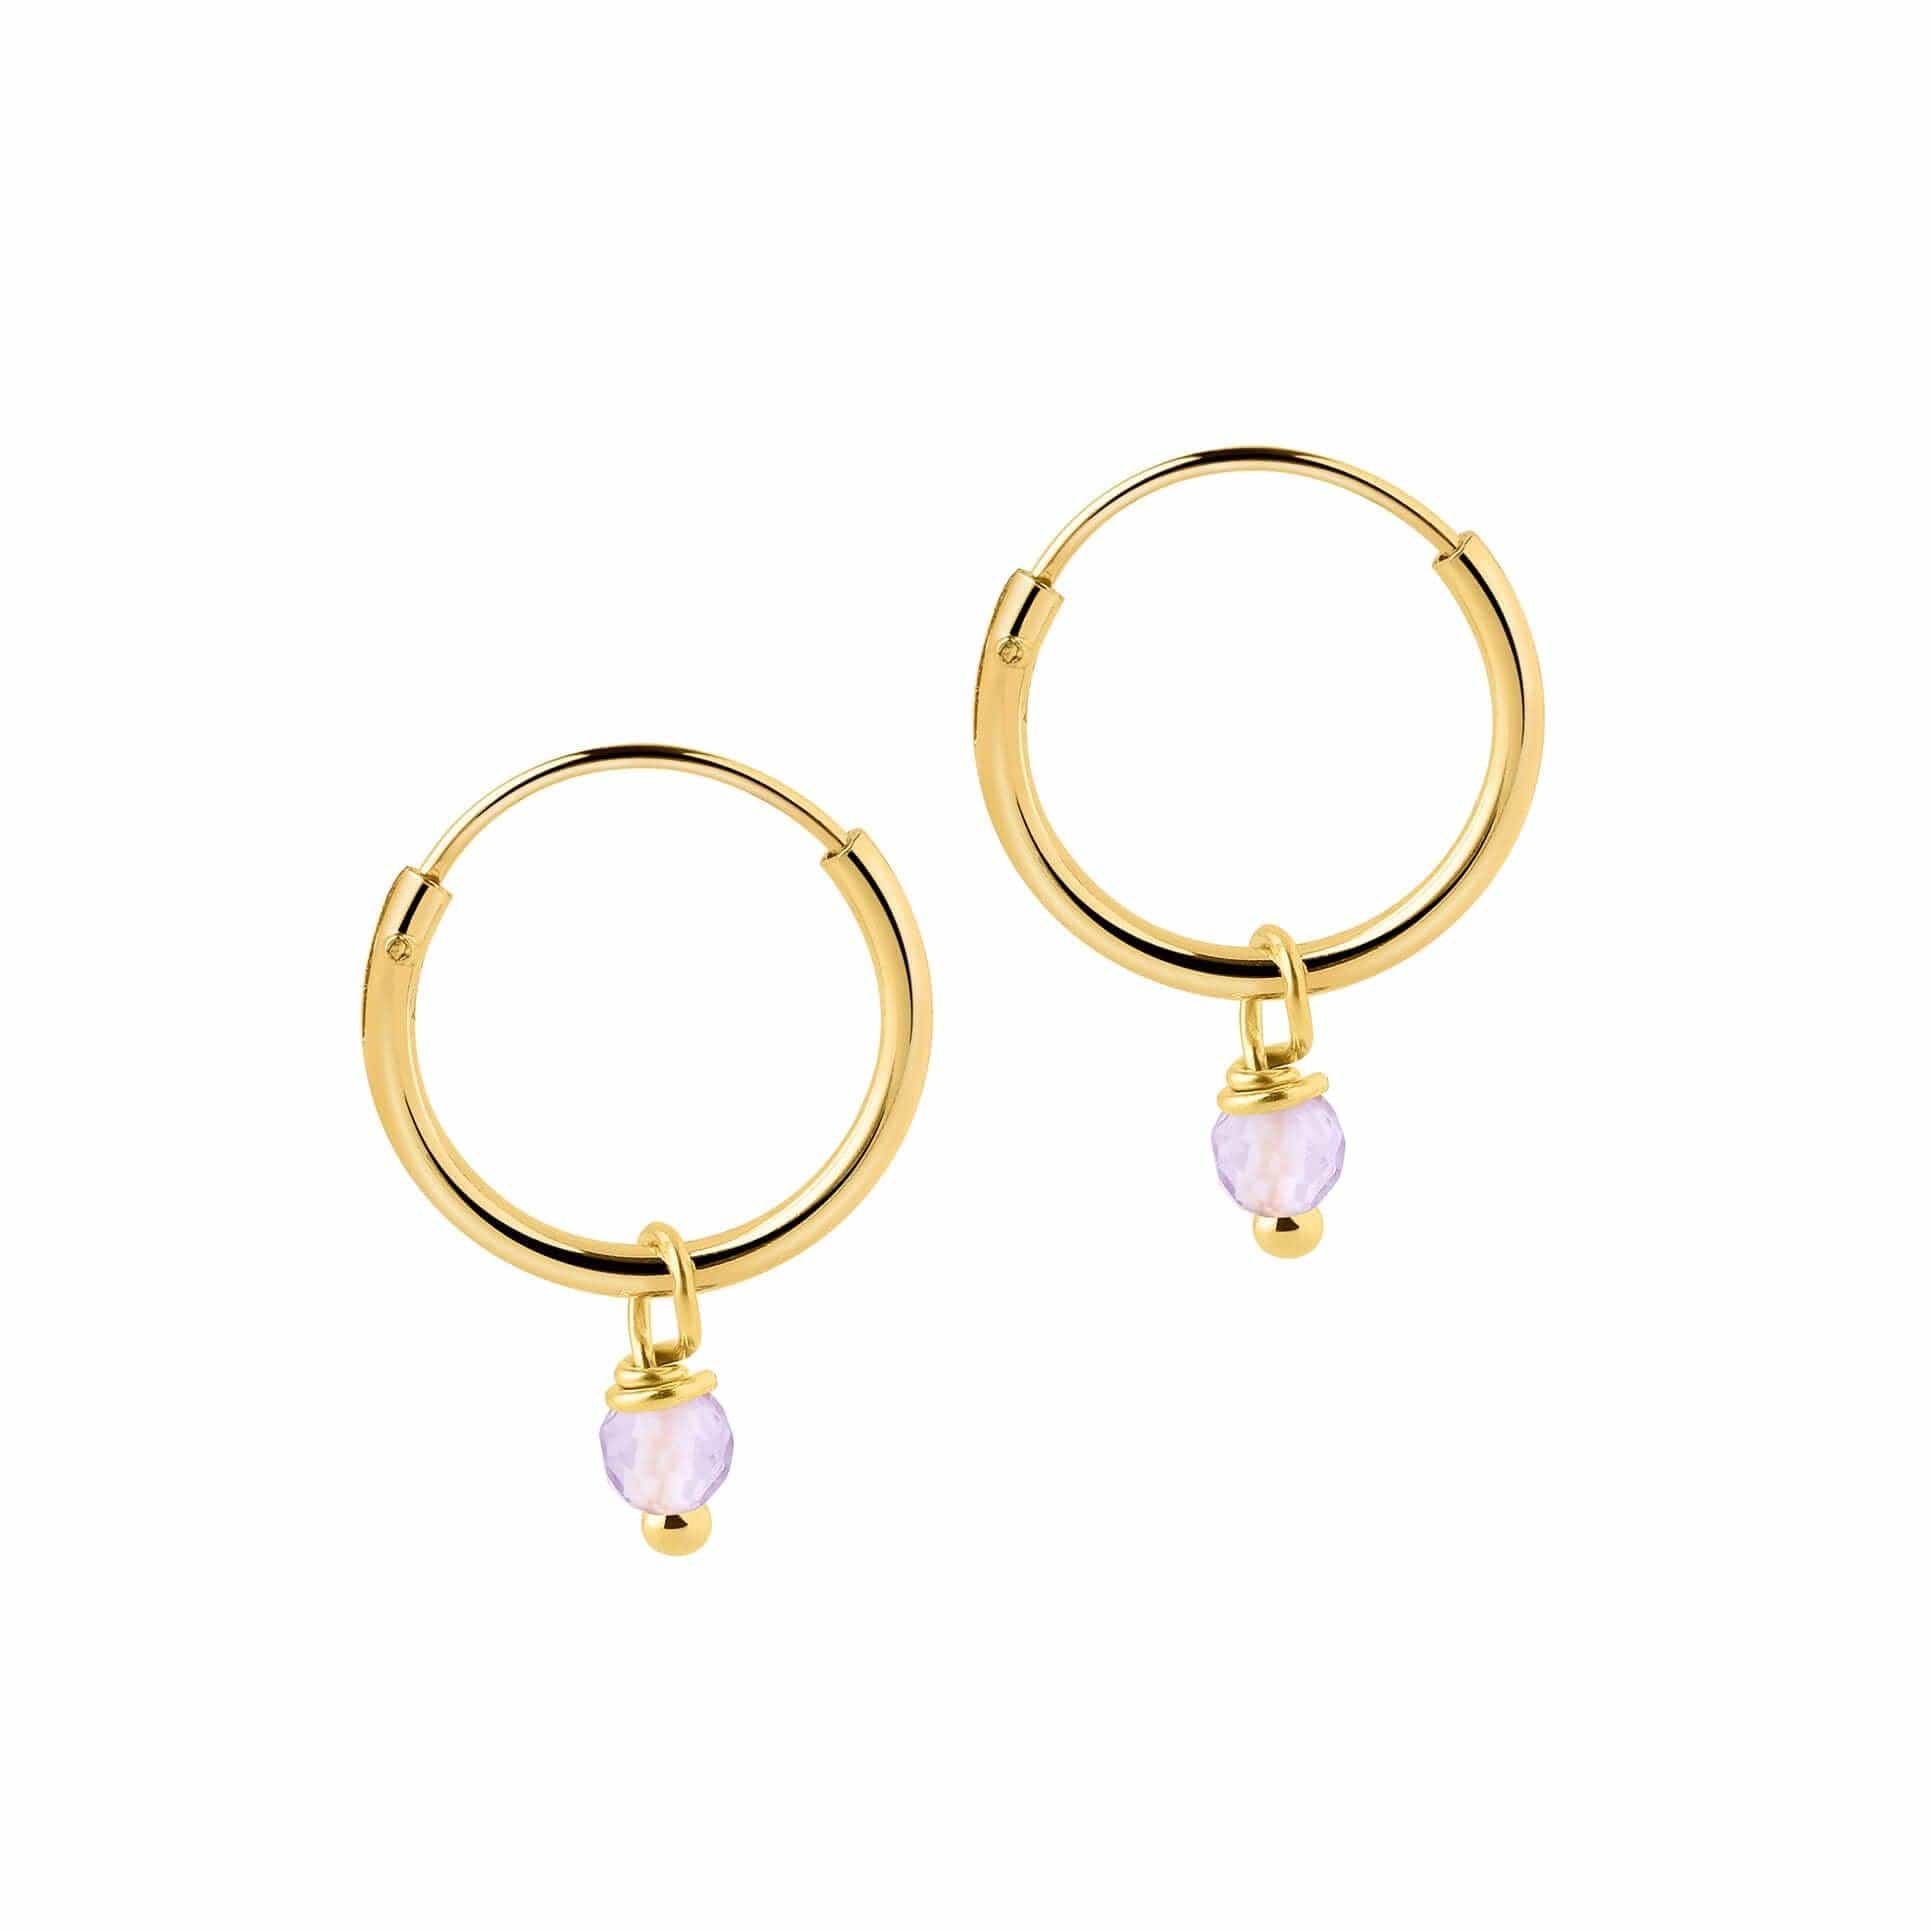 12mm Gold Plated Hoop Earrings with Purple Stone